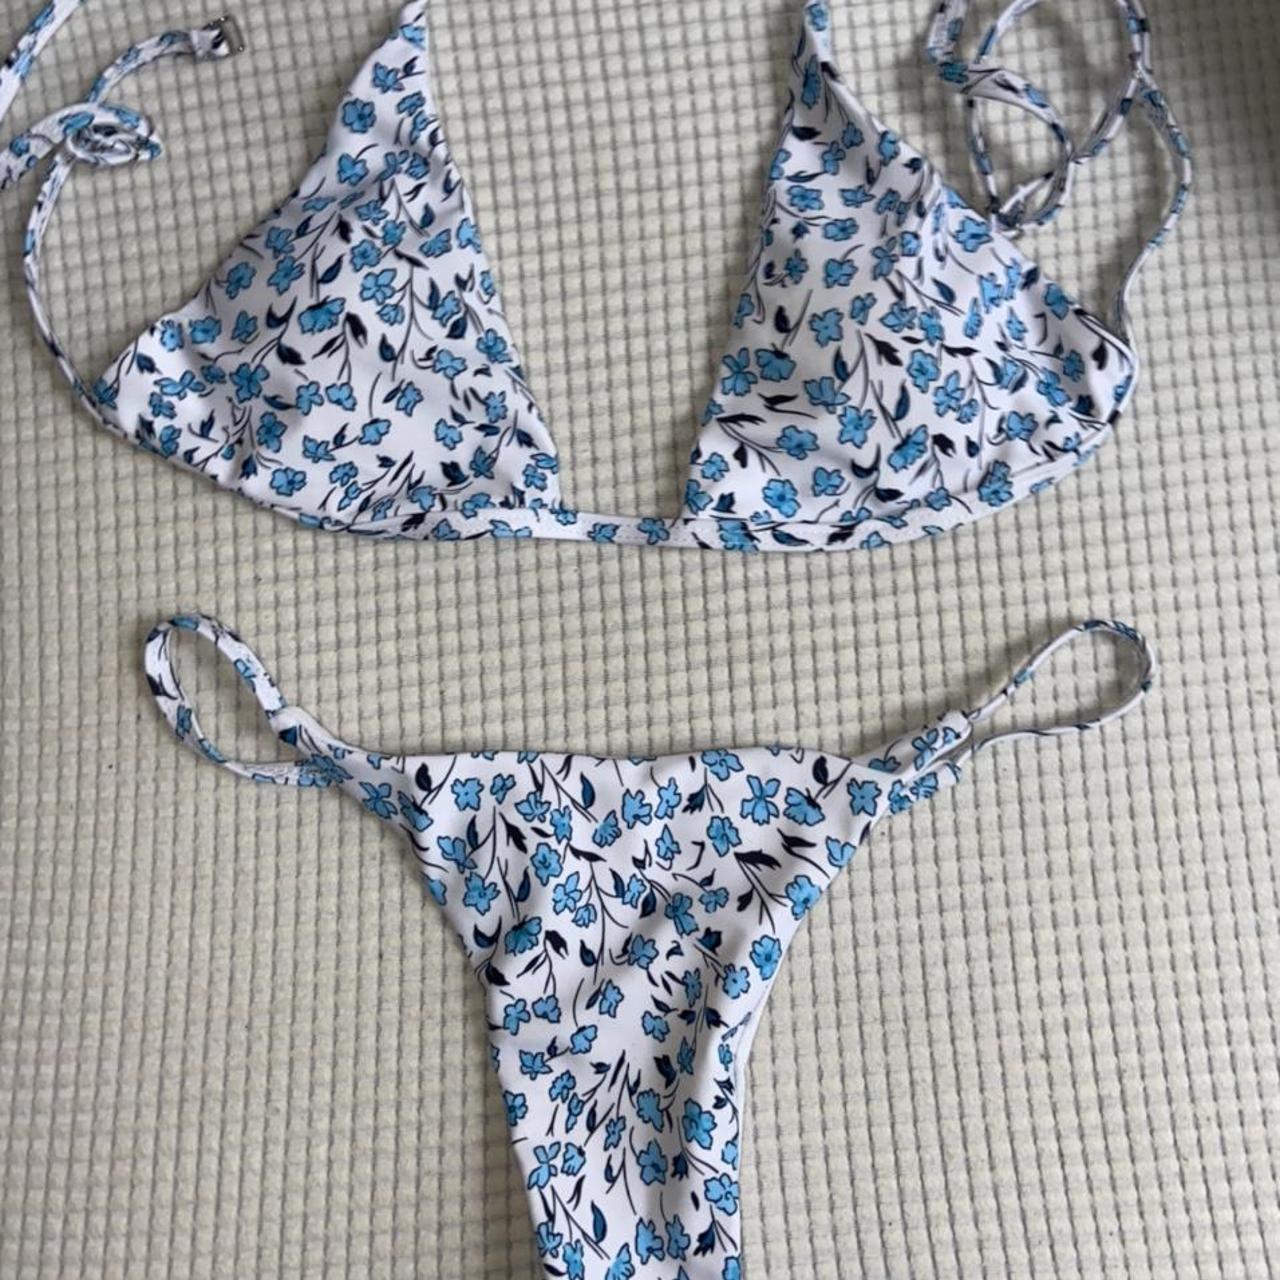 Cute floral bikini, Wore it once the top is too small